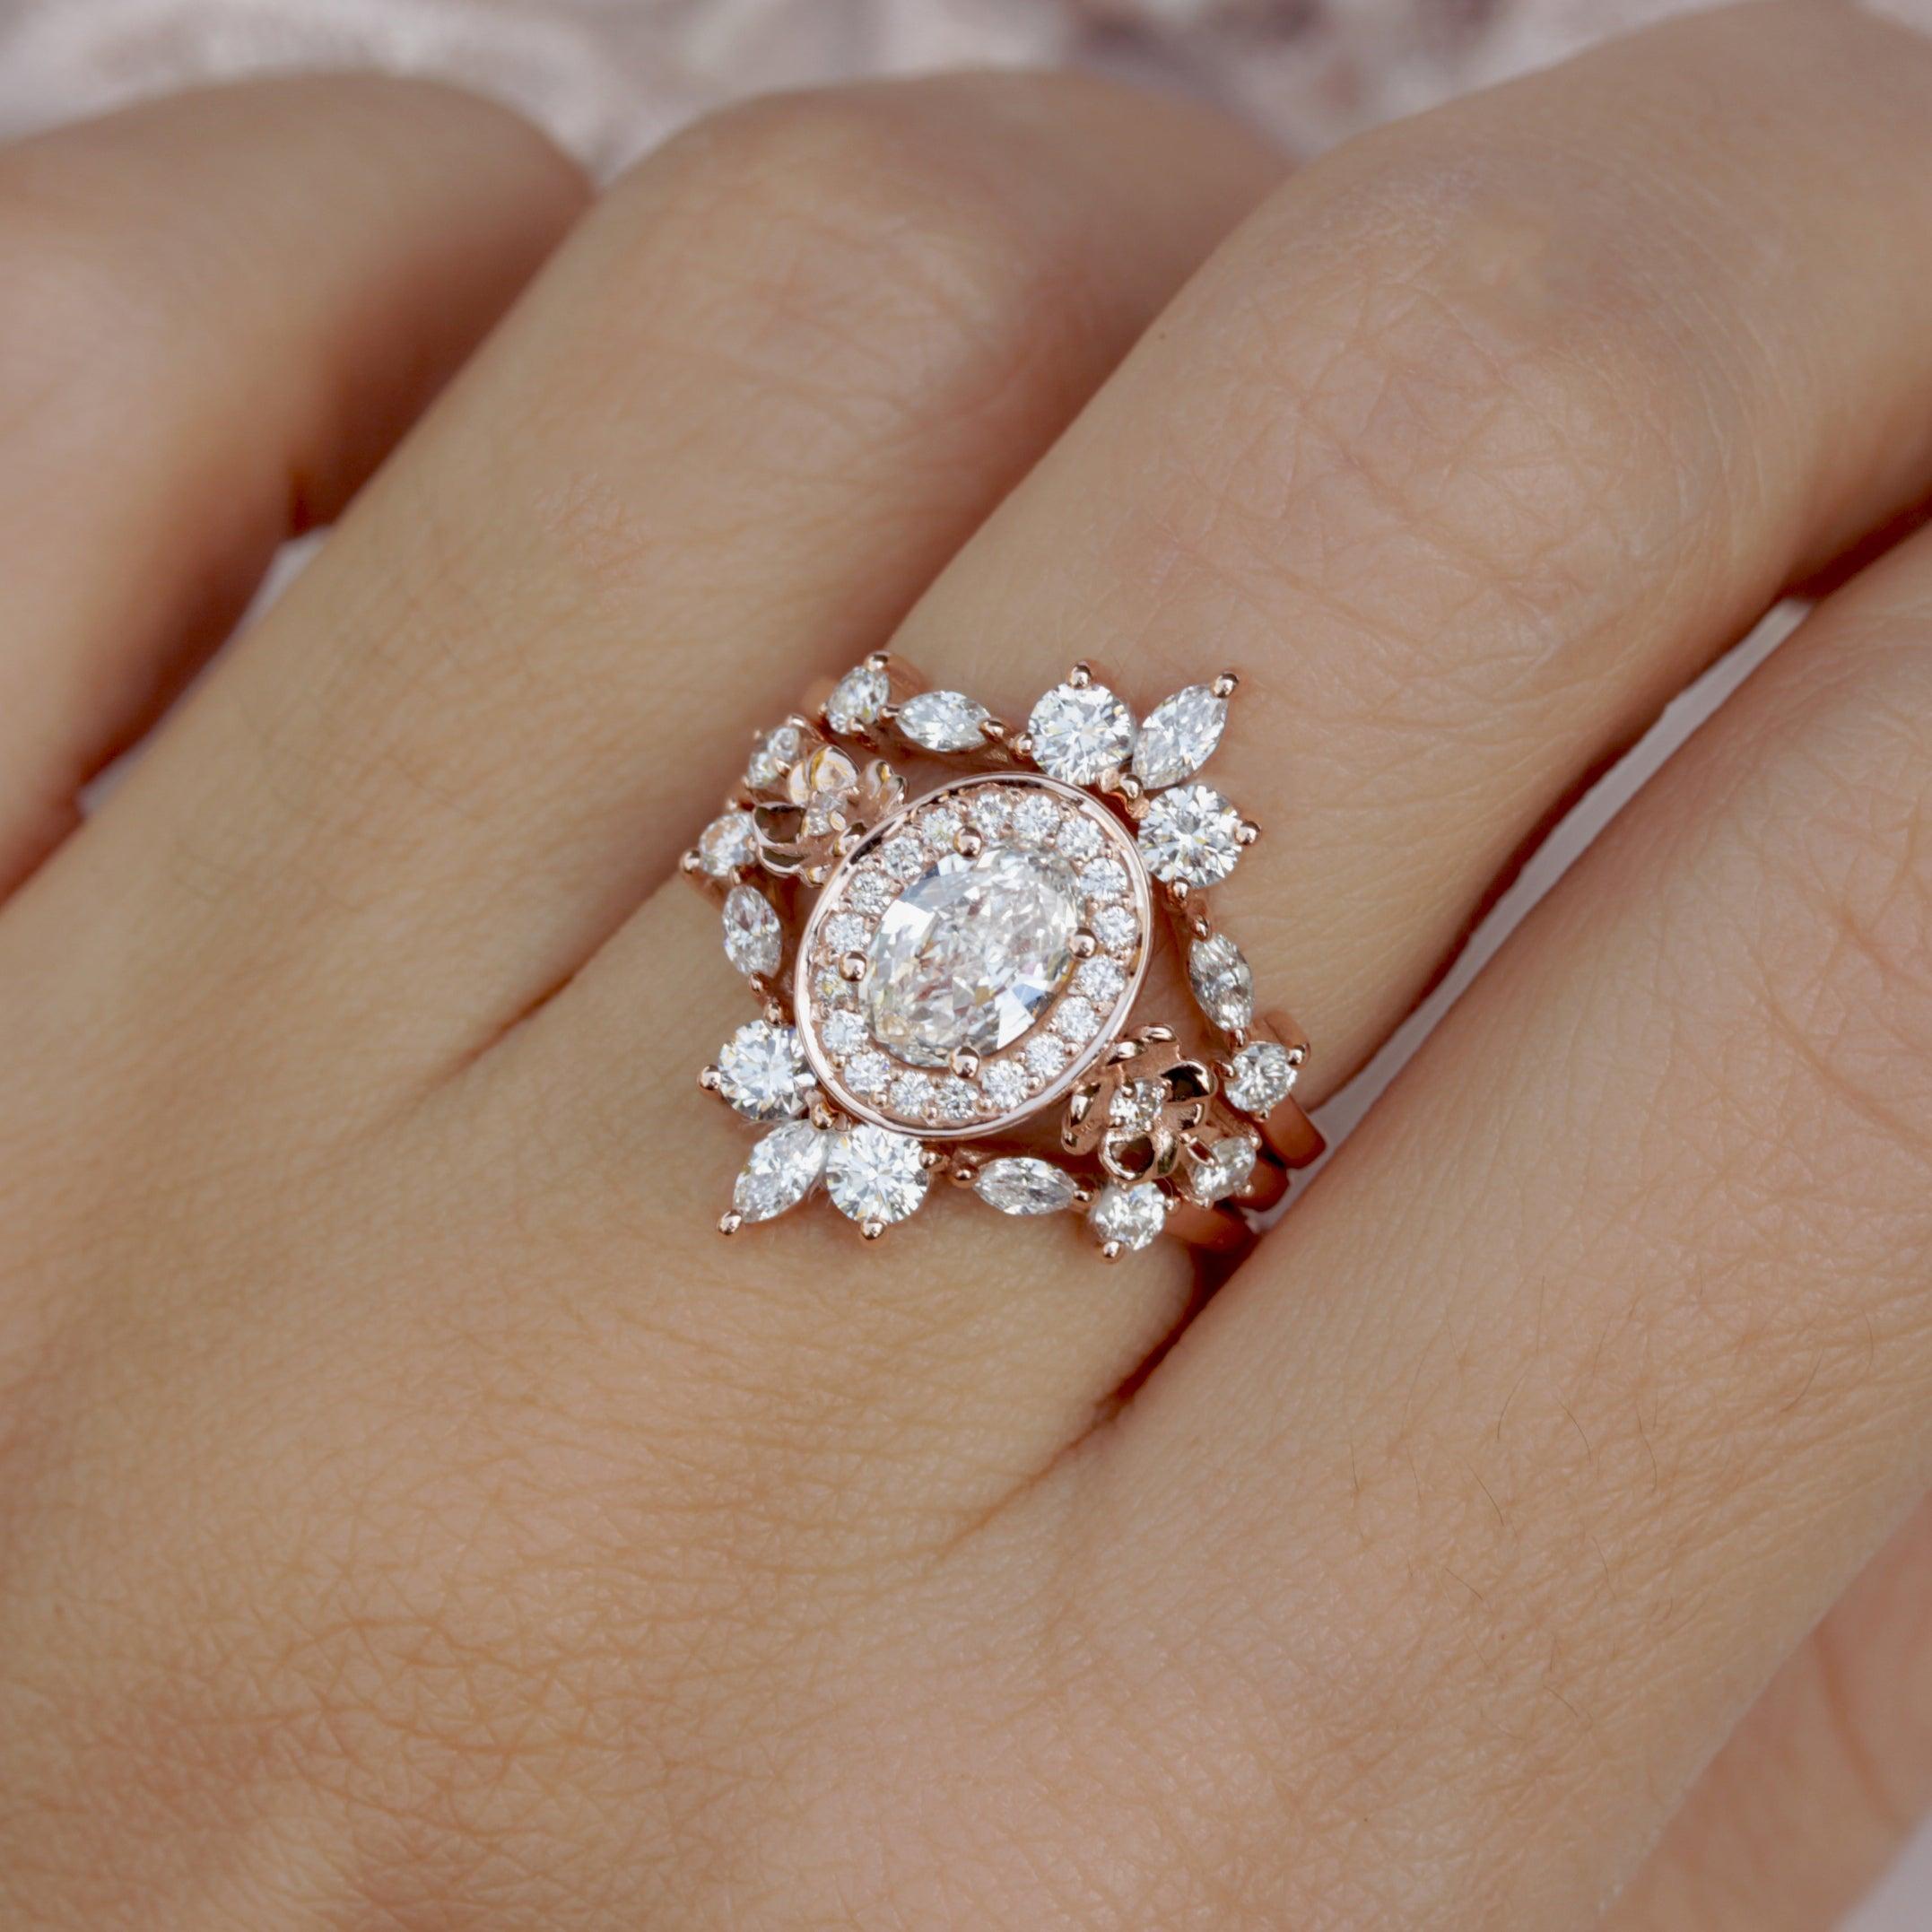 Women's Oval Halo Diamond Floral Engagement Ring - 